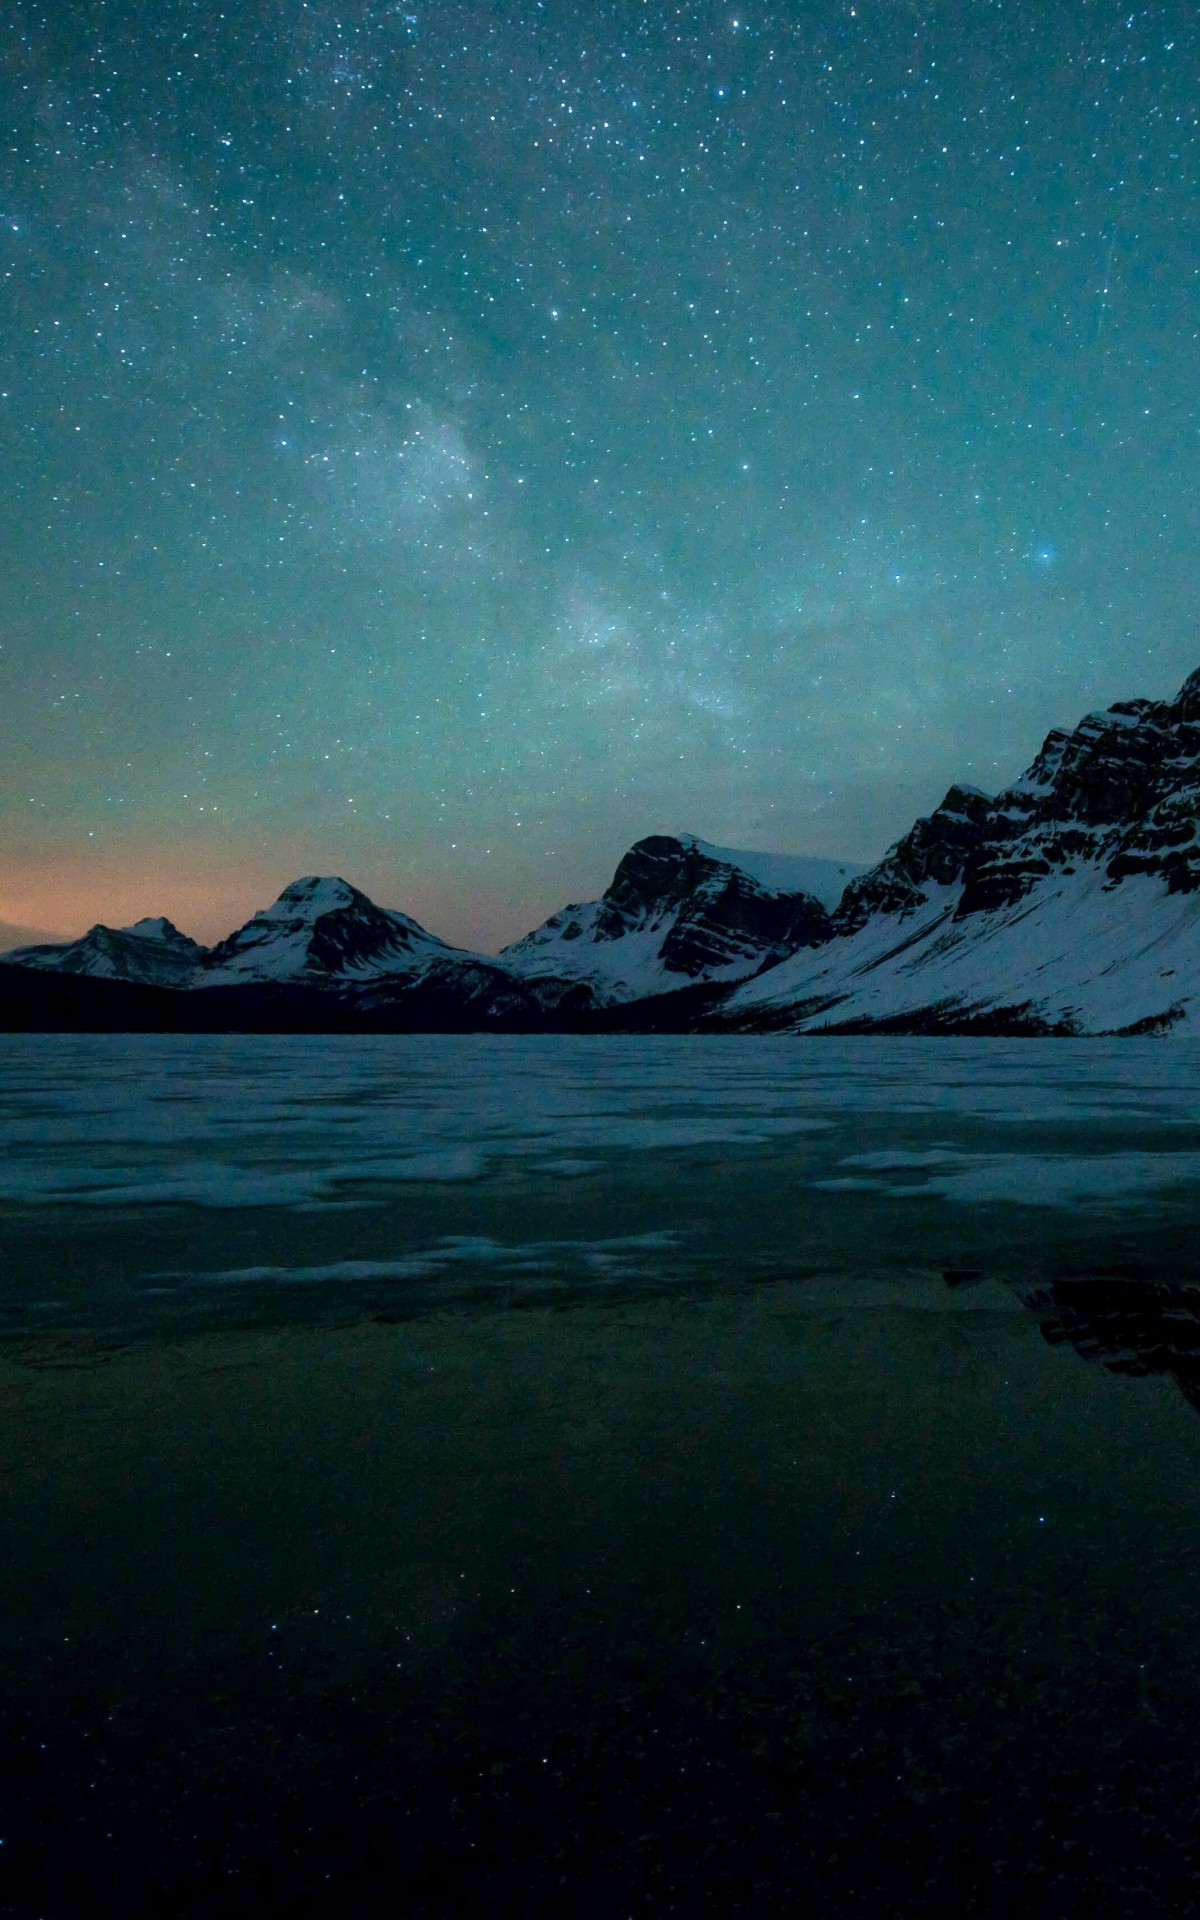 Milky Way over Bow Lake, Alberta, Canada Wallpaper for Amazon Kindle Fire HDX